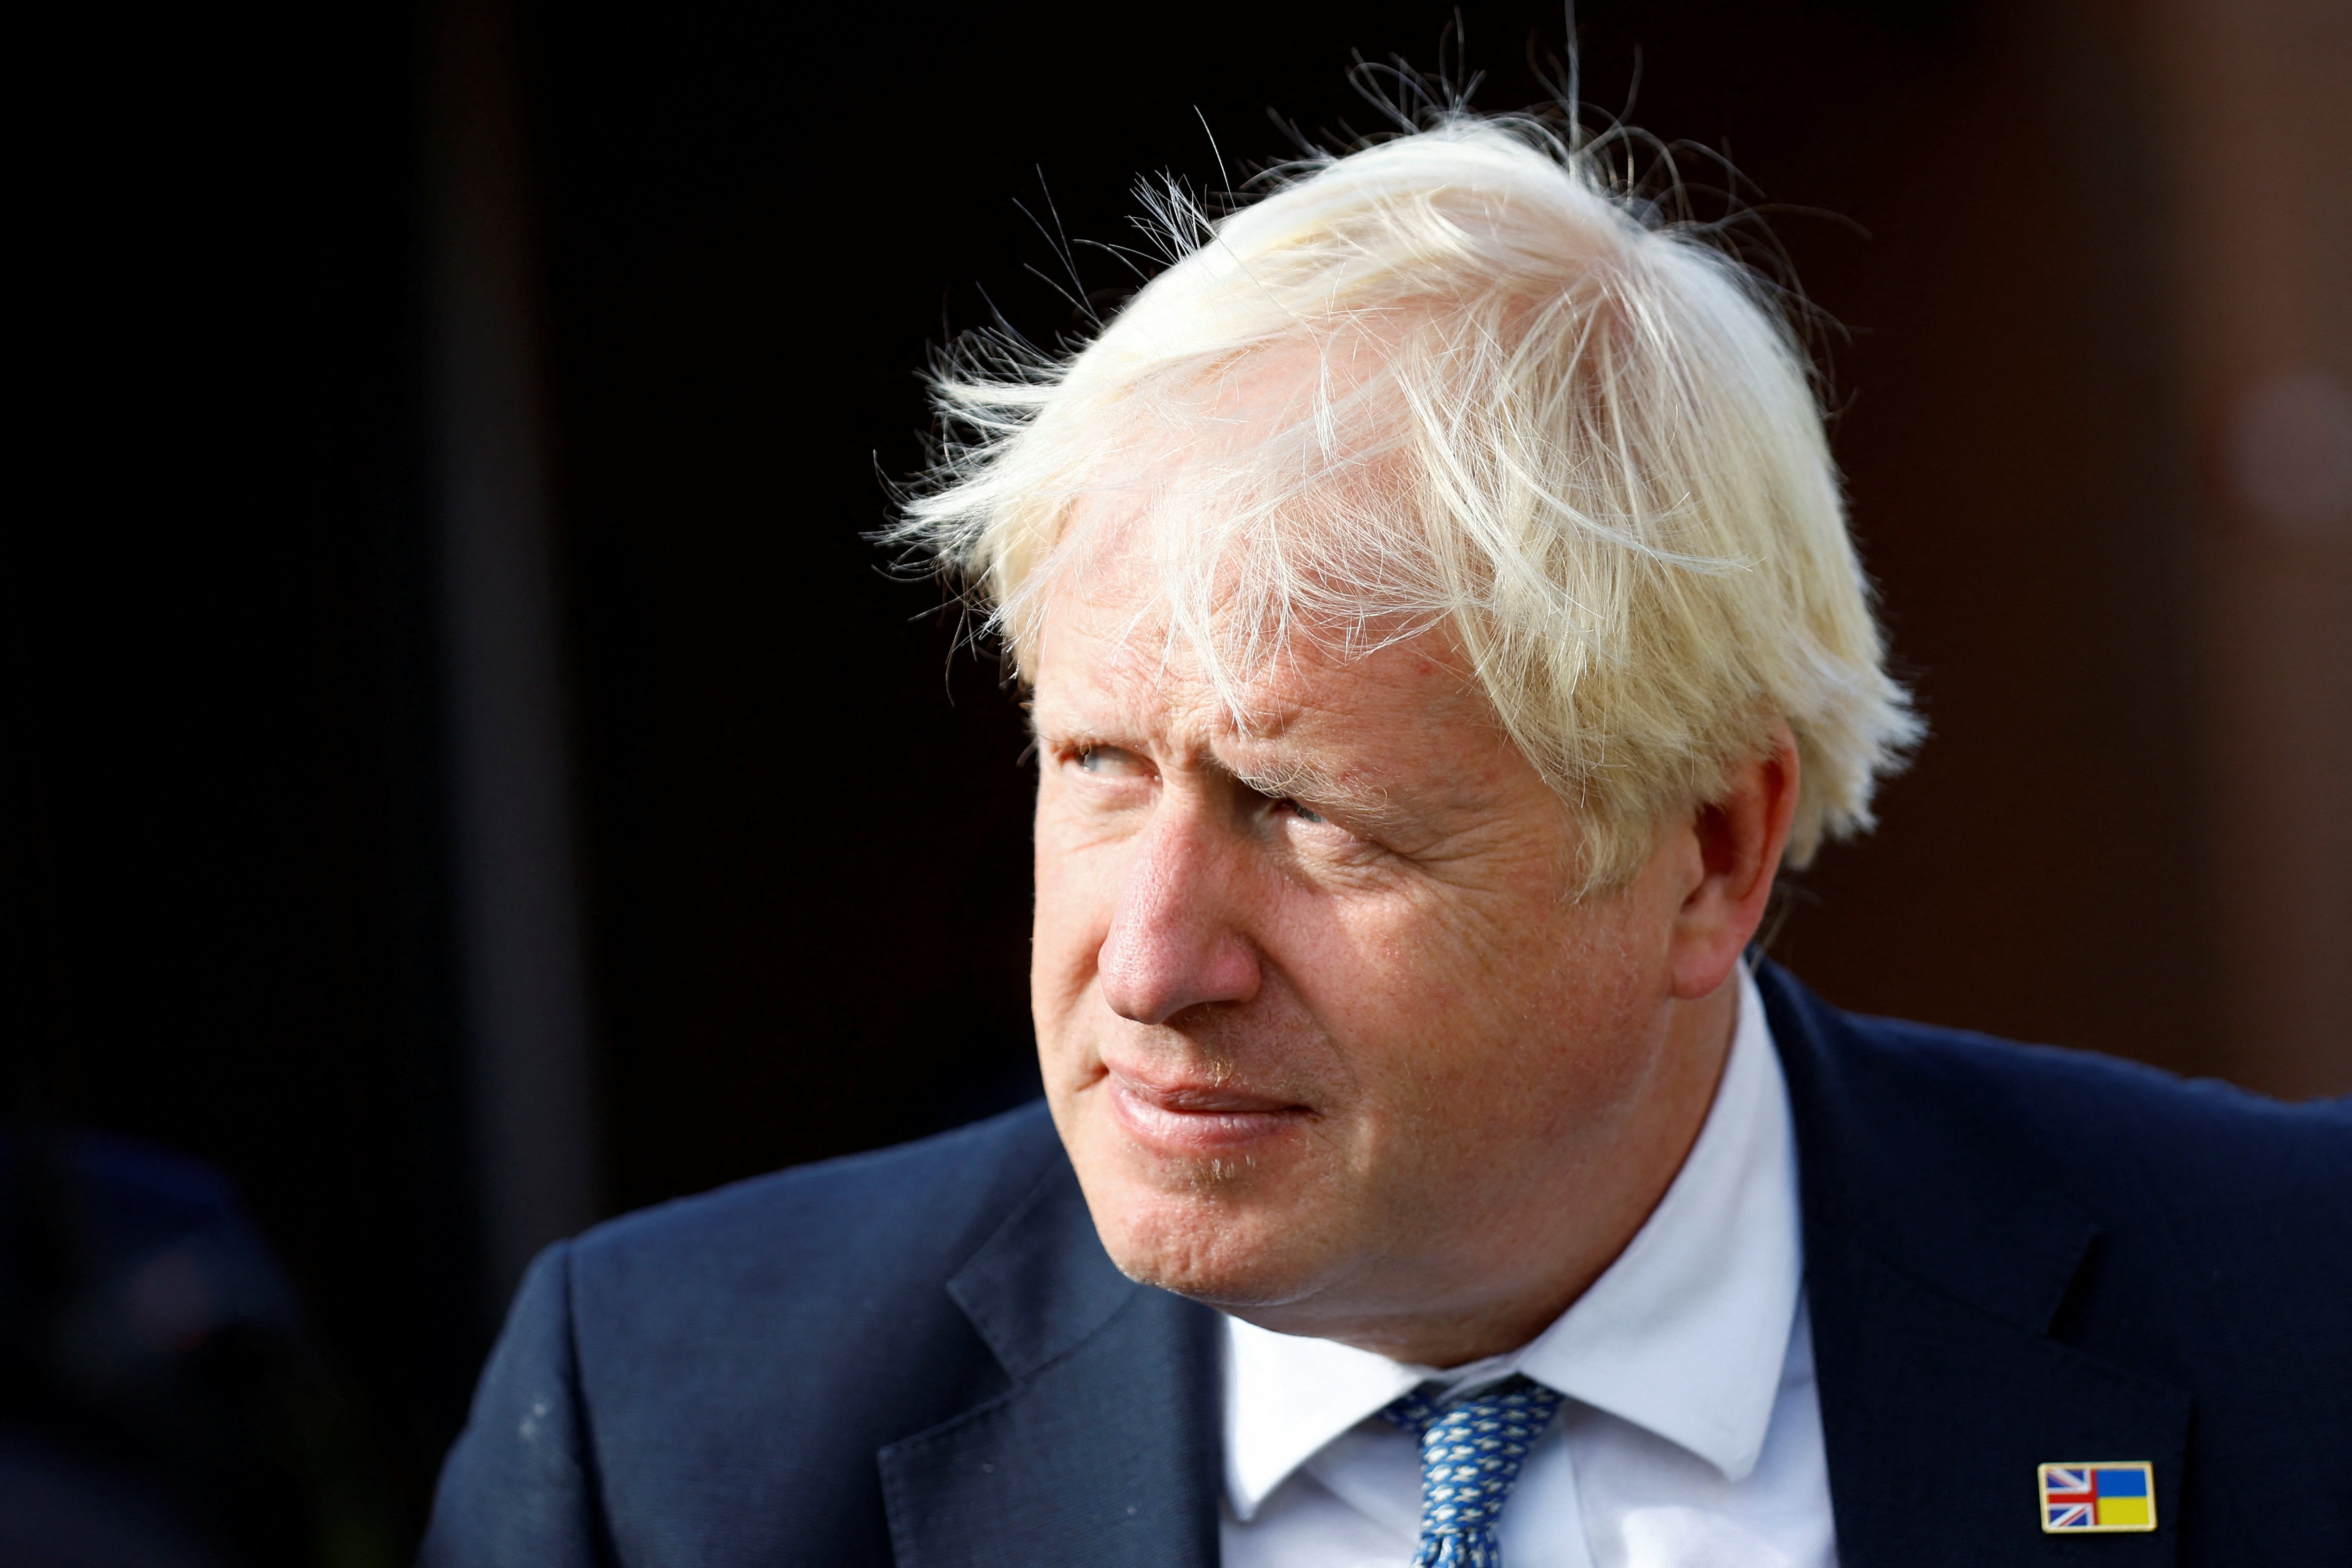 Johnson stood down as prime minister in July